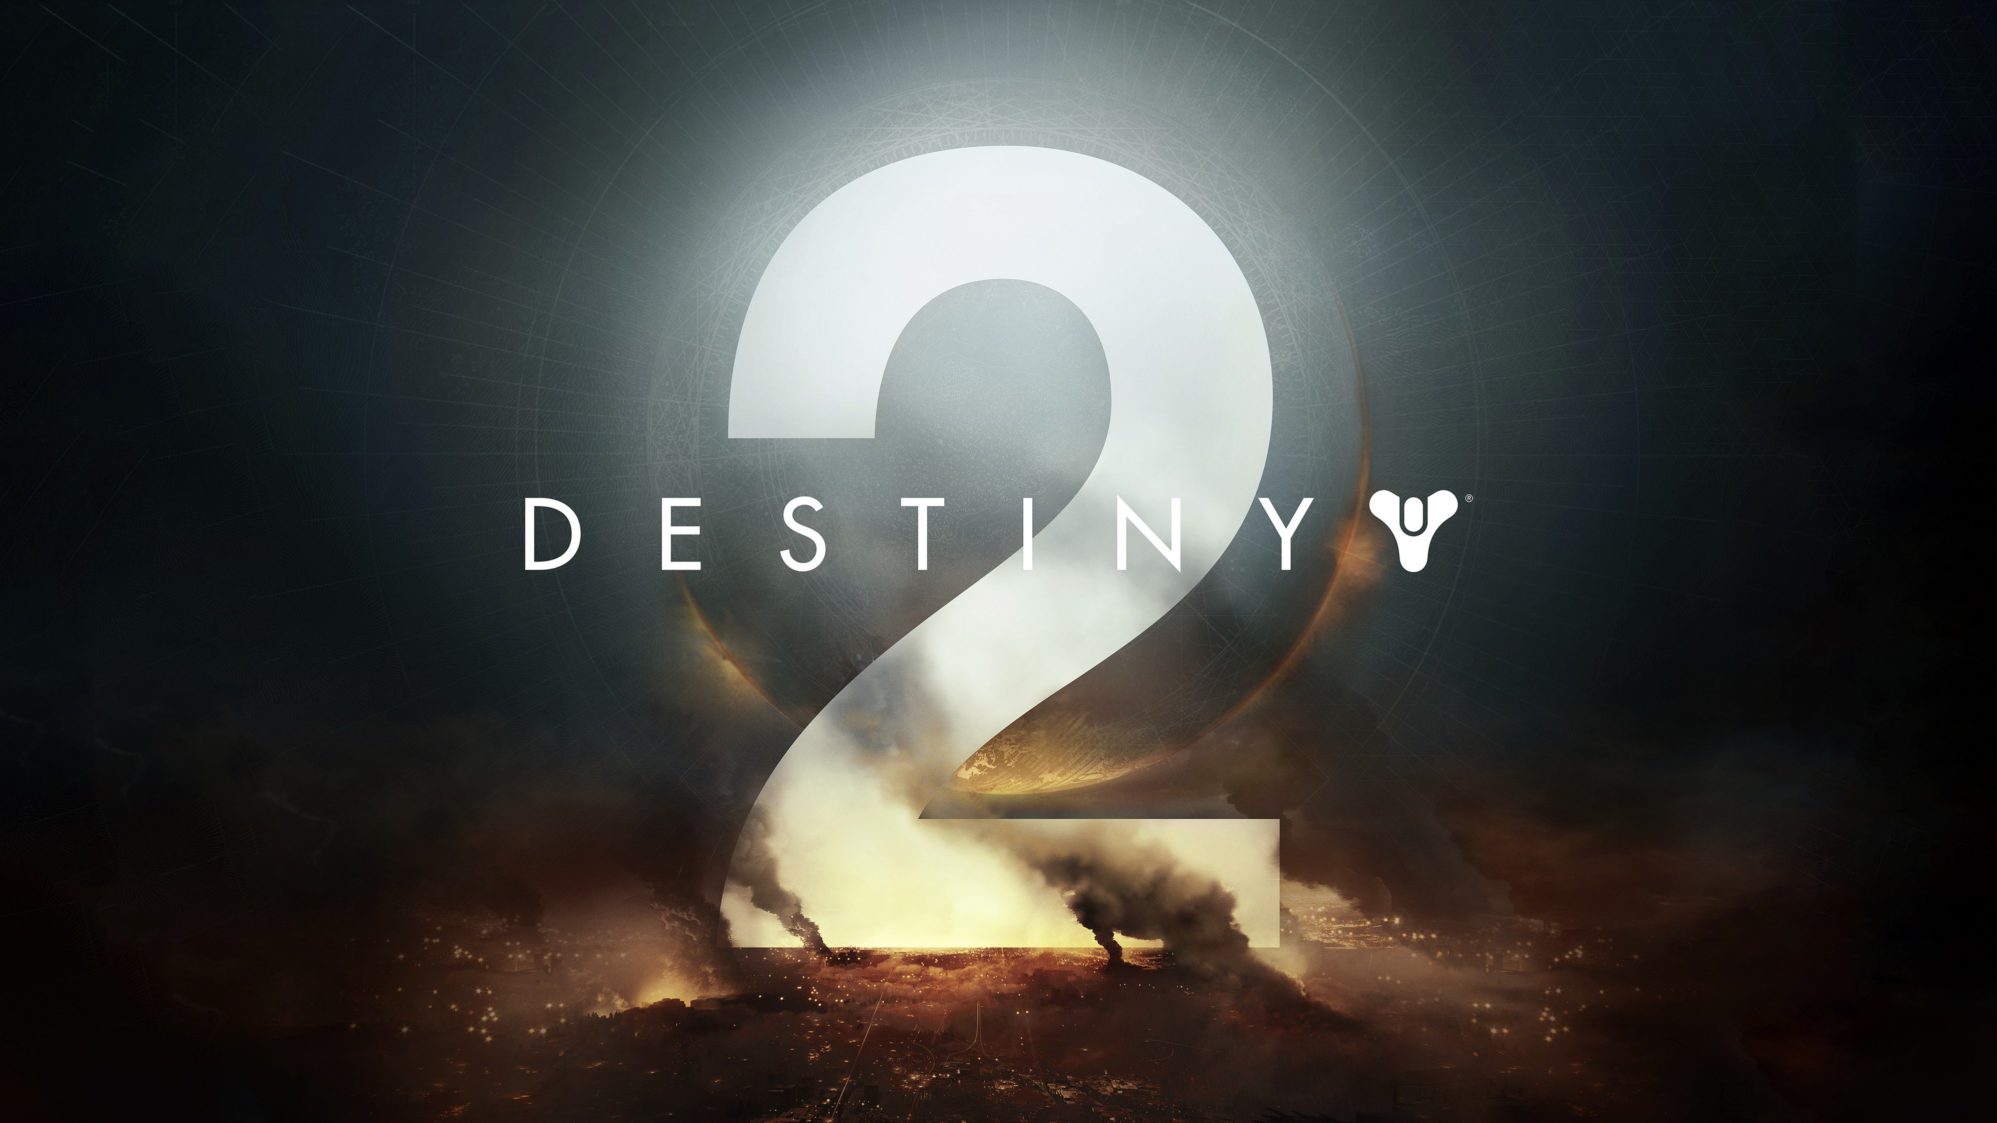 Destiny 2 news- a collection of various new information